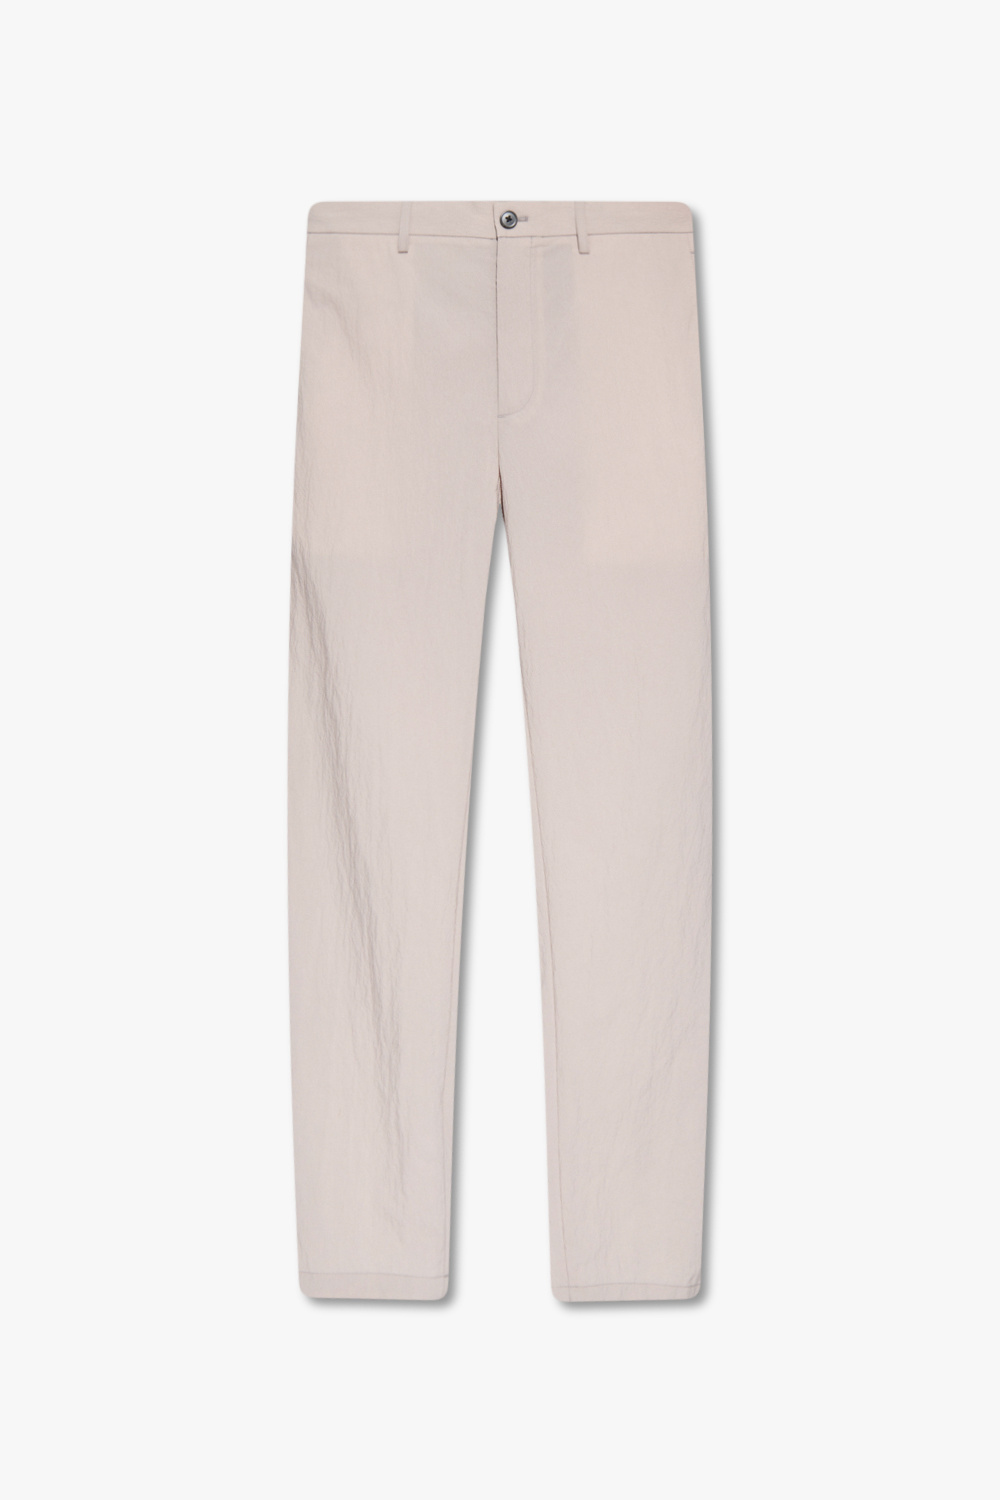 Theory Tapered Floral trousers